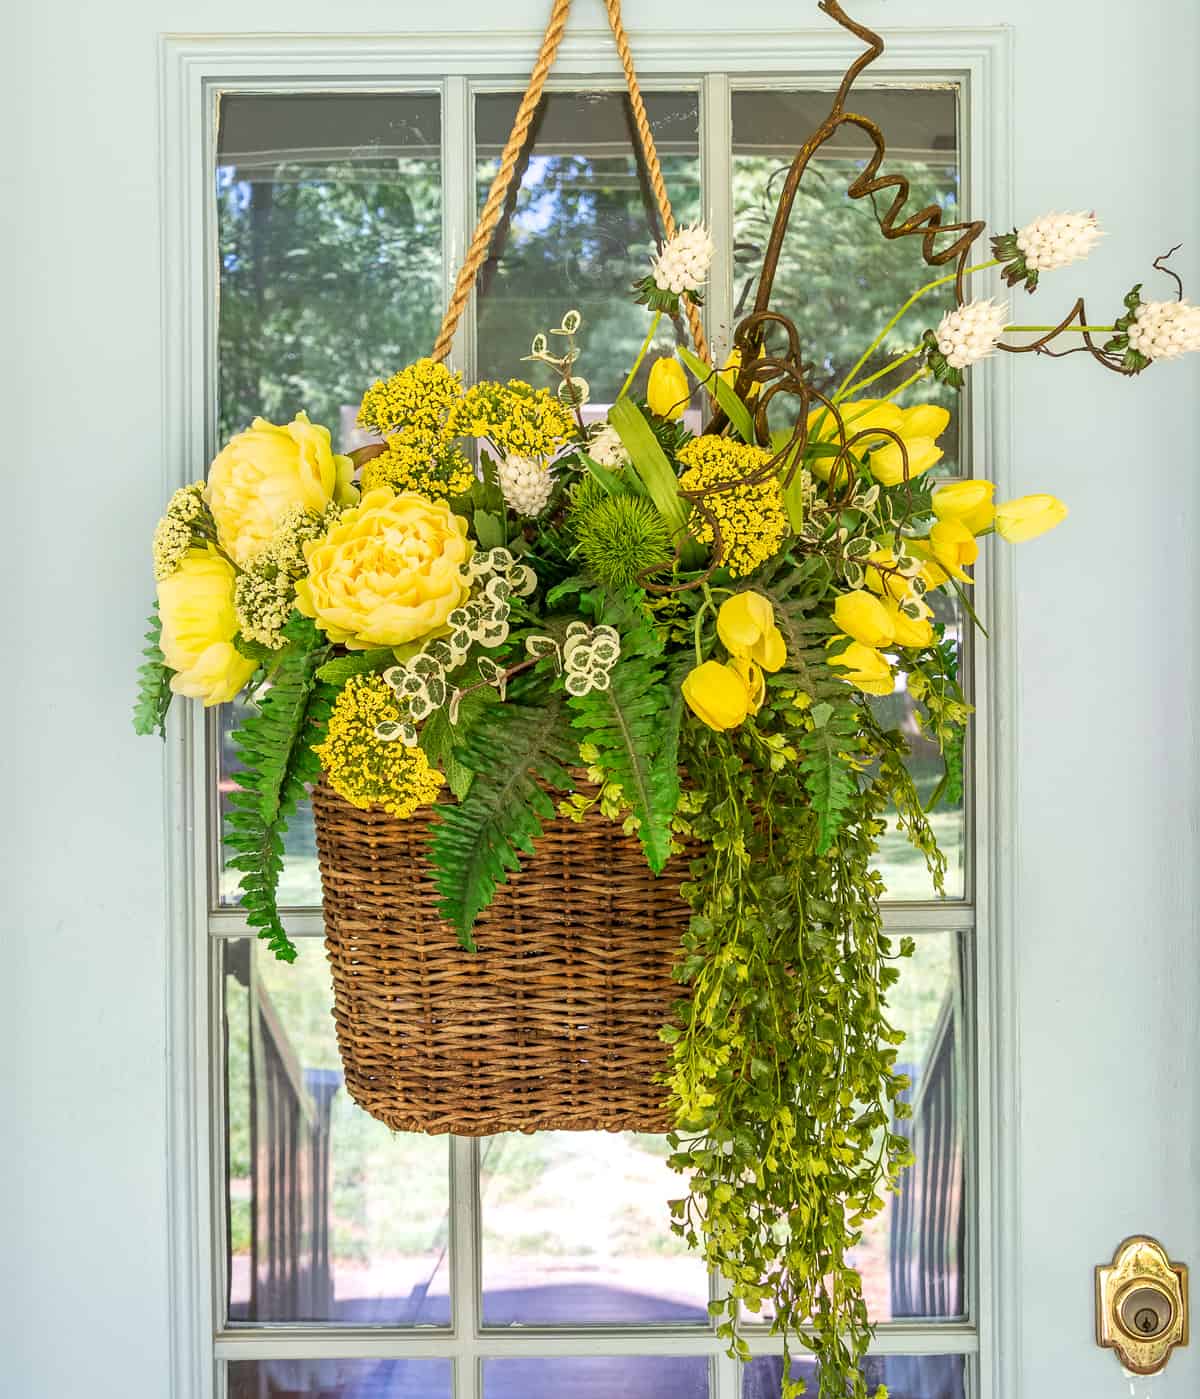 yellow flowers and greenery in a hanging basket on a gray front door for a spring door decoration